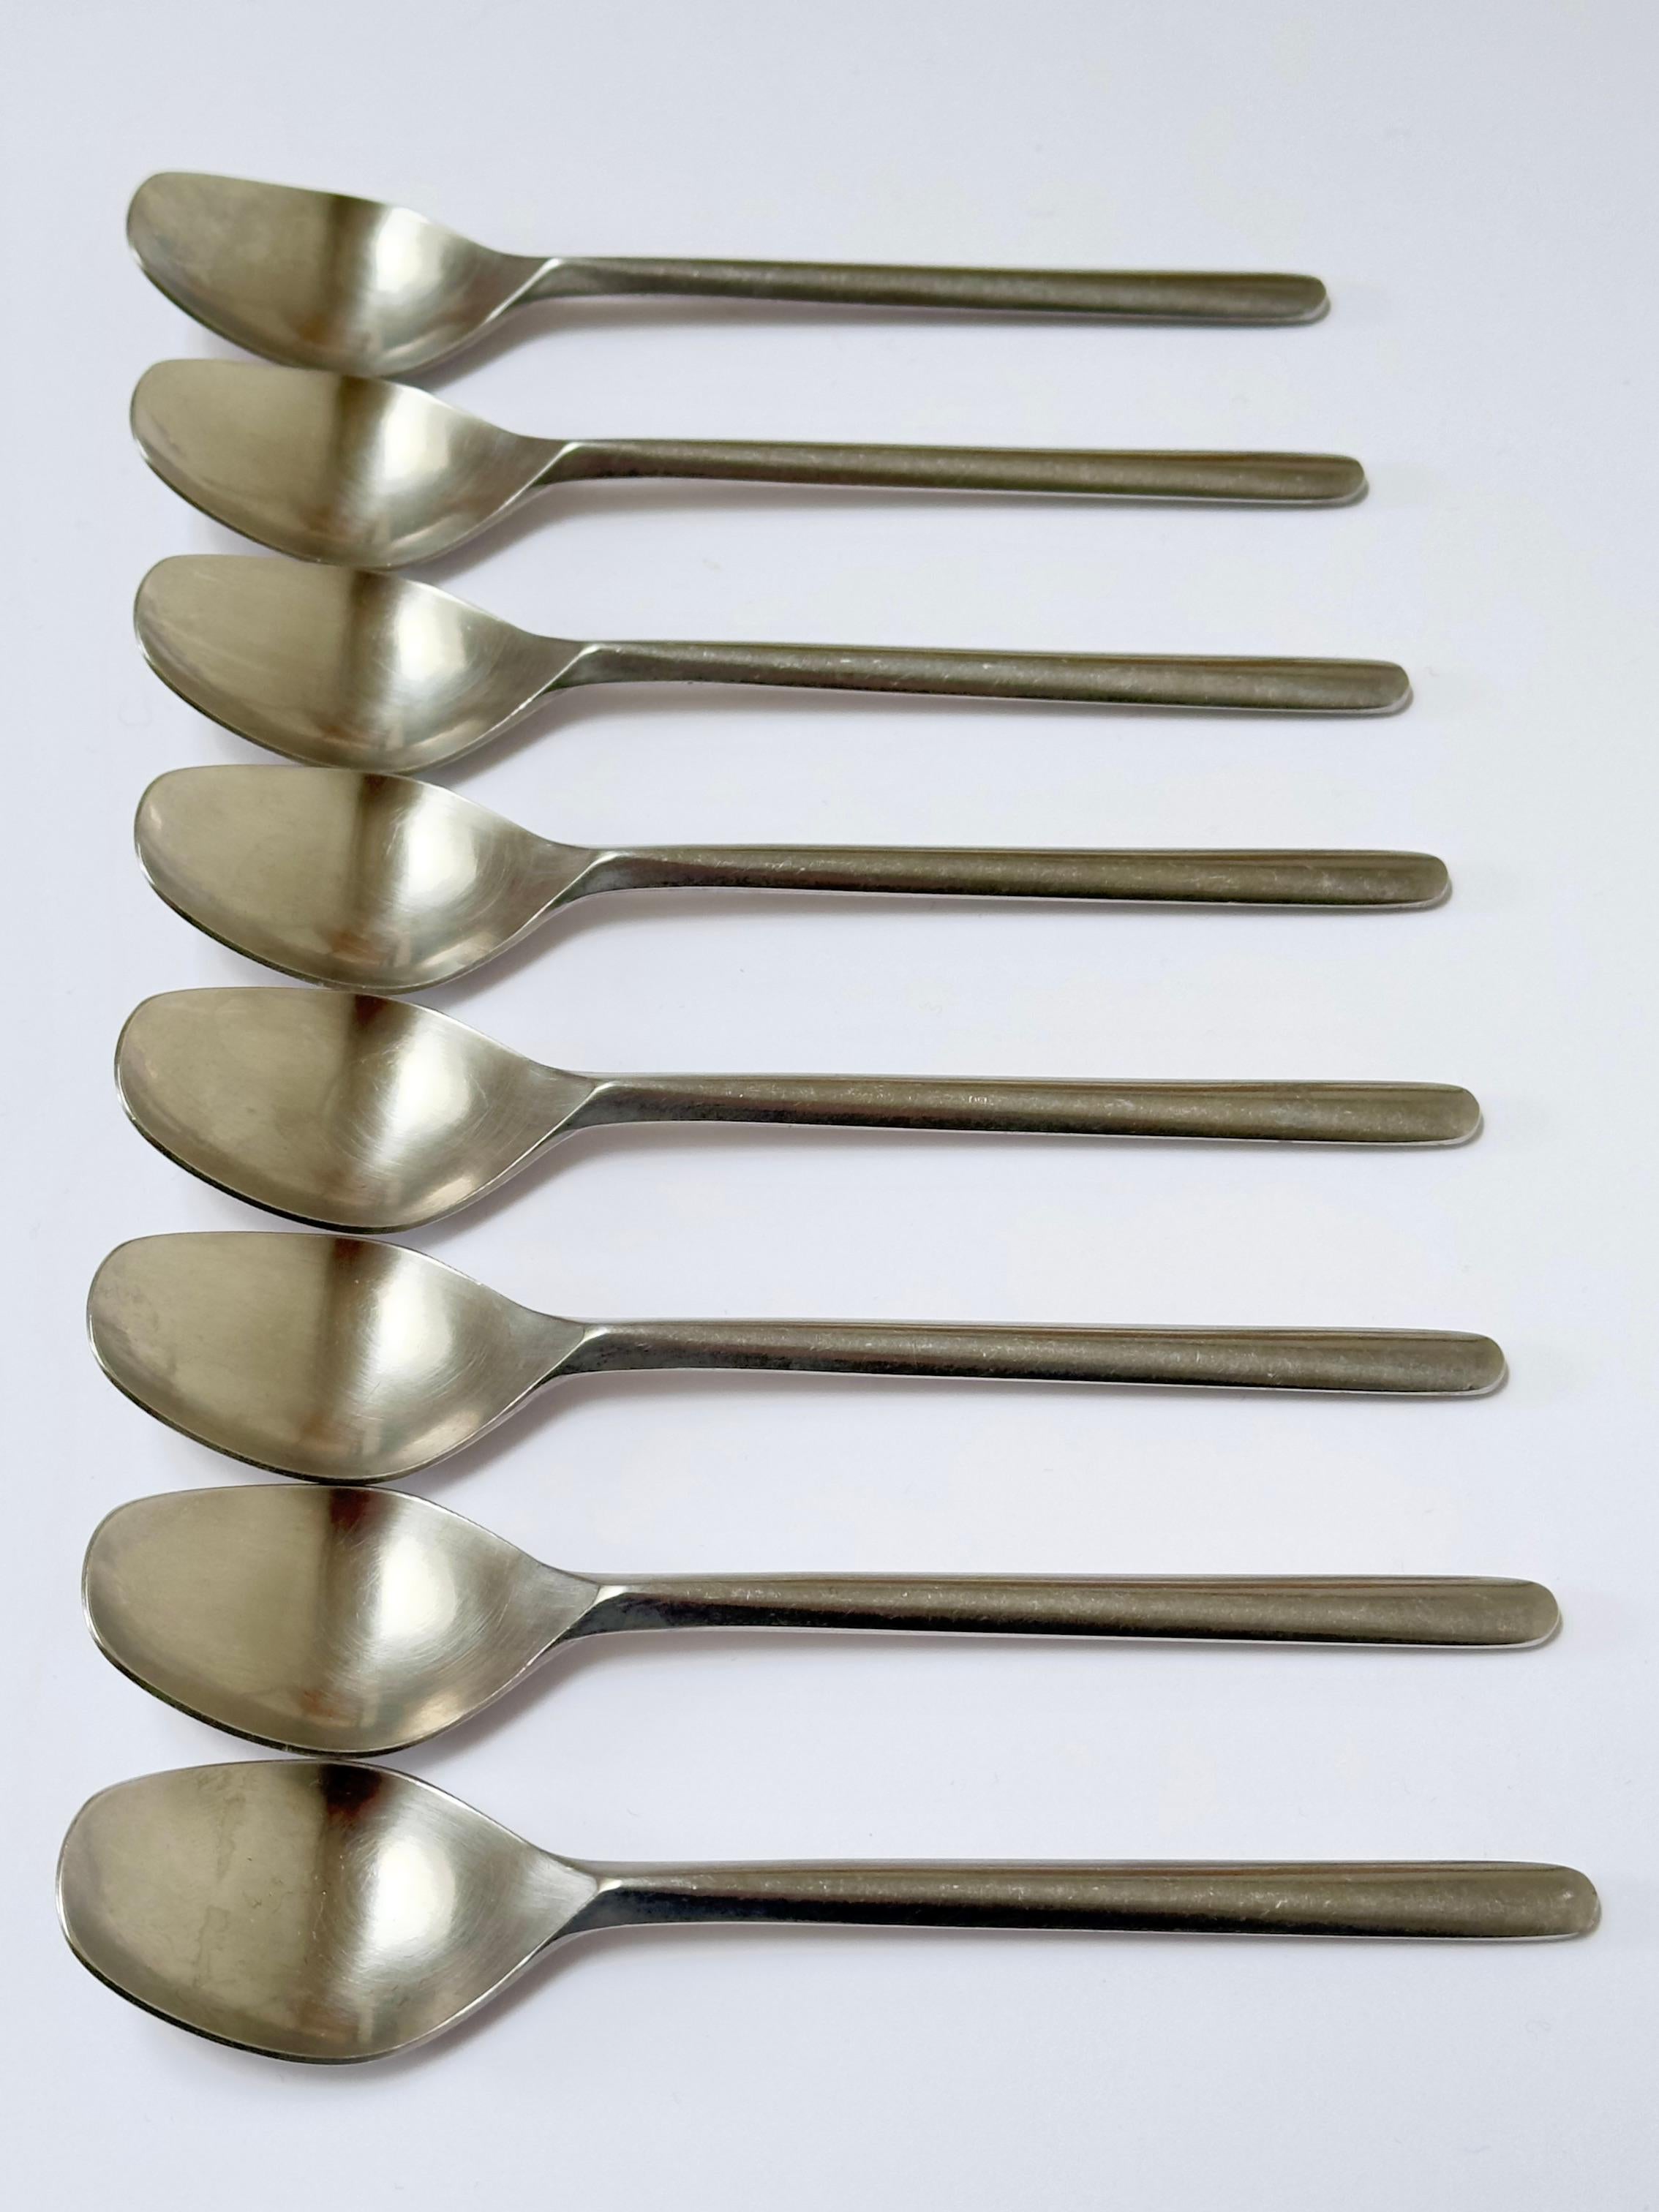 Mid-20th Century Composition Cutlery Set, Tapio Wirkkala for Rosenthal, Germany 1963